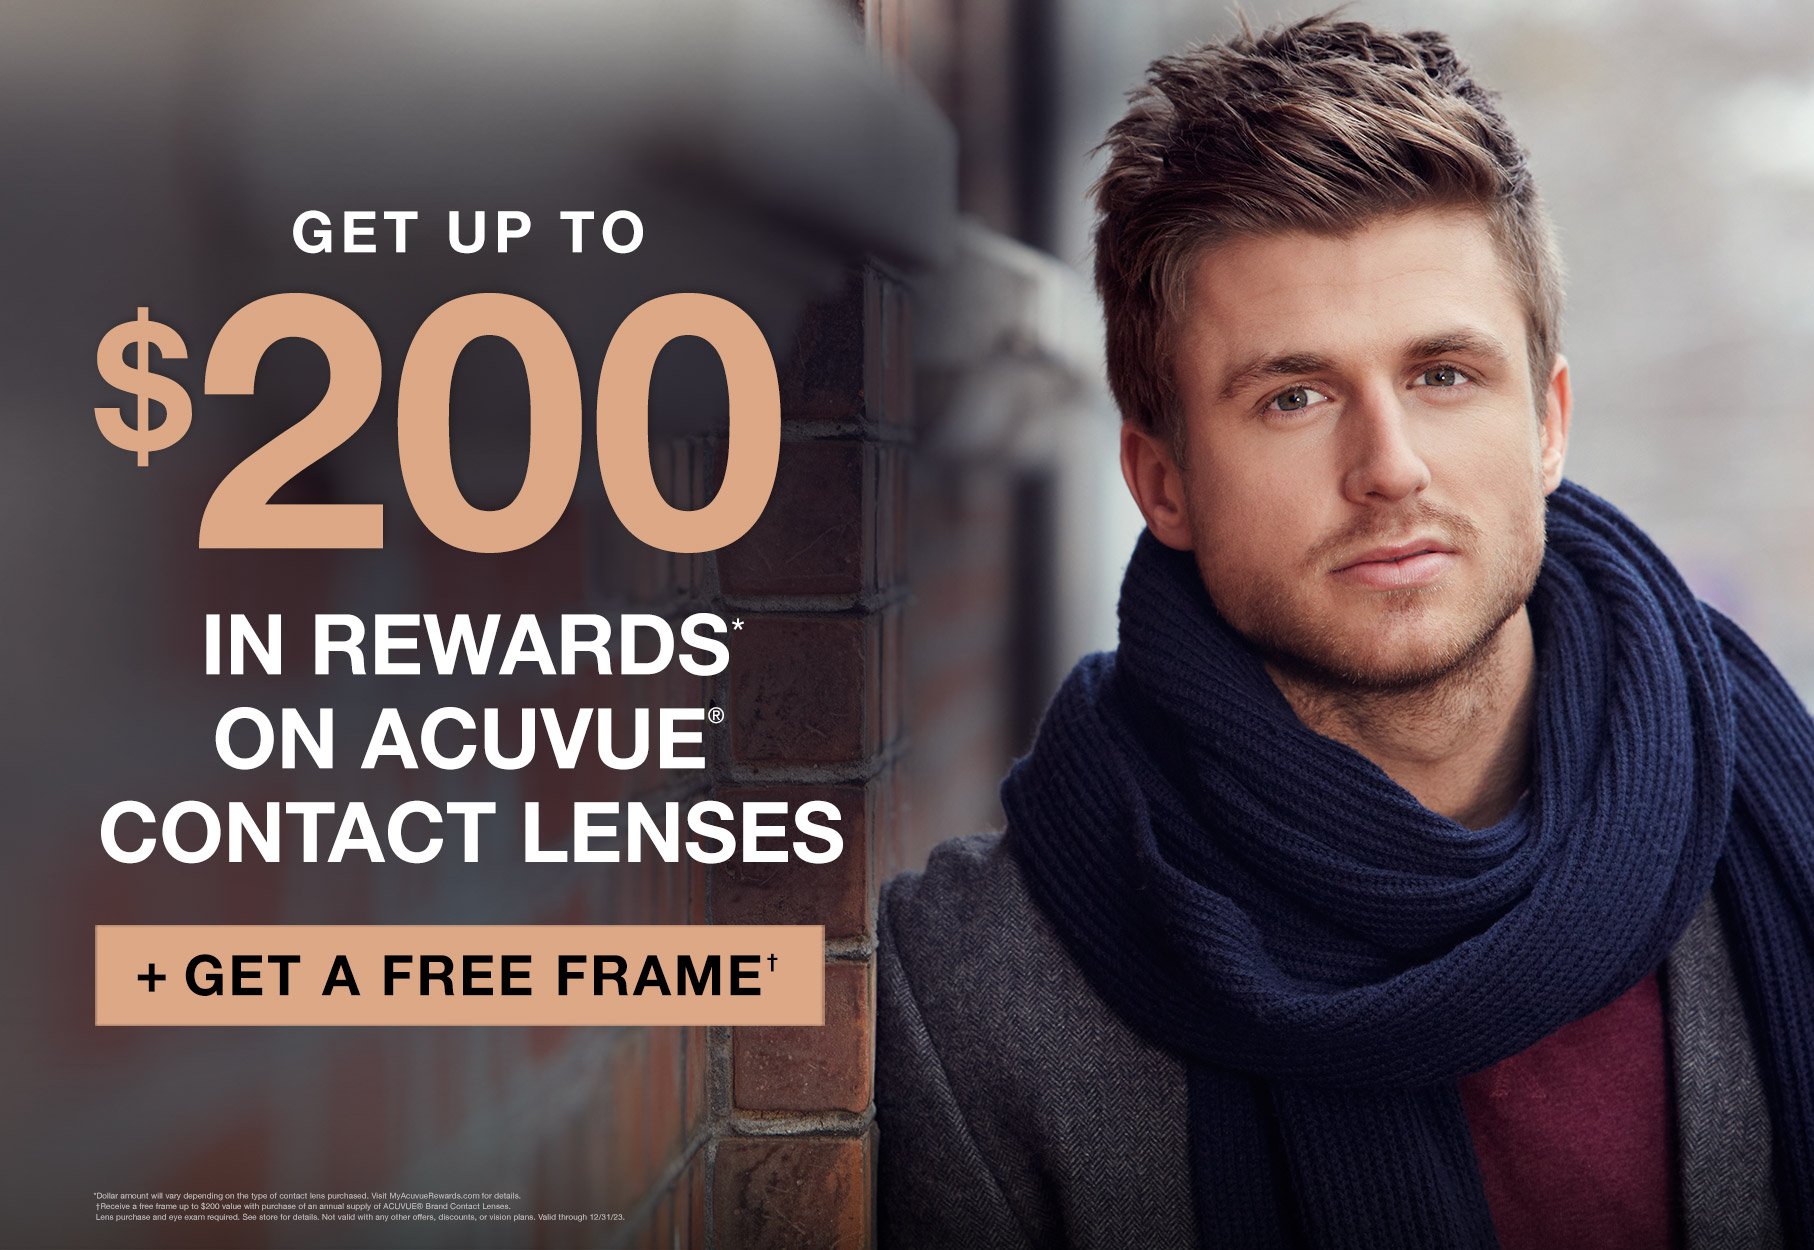 Text: Get up to $200 in rewards on acuvue contact lenses* plus get a free frame† * Dollar amount will vary depending on the type of contact lens purchased. Visit MyAcuvueRewards.com for details. † Receive a free frame up to $200 value with purchase of an annual supply of ACUVUE® Brand Contact Lenses. Lens purchase and eye exam required. See store for details. Not valid with any other offers, discounts, or vision plans. Valid at participating locations. Valid through 12/31/23. Photo: Blonde young man leaning against a brick wall wearing winter attire